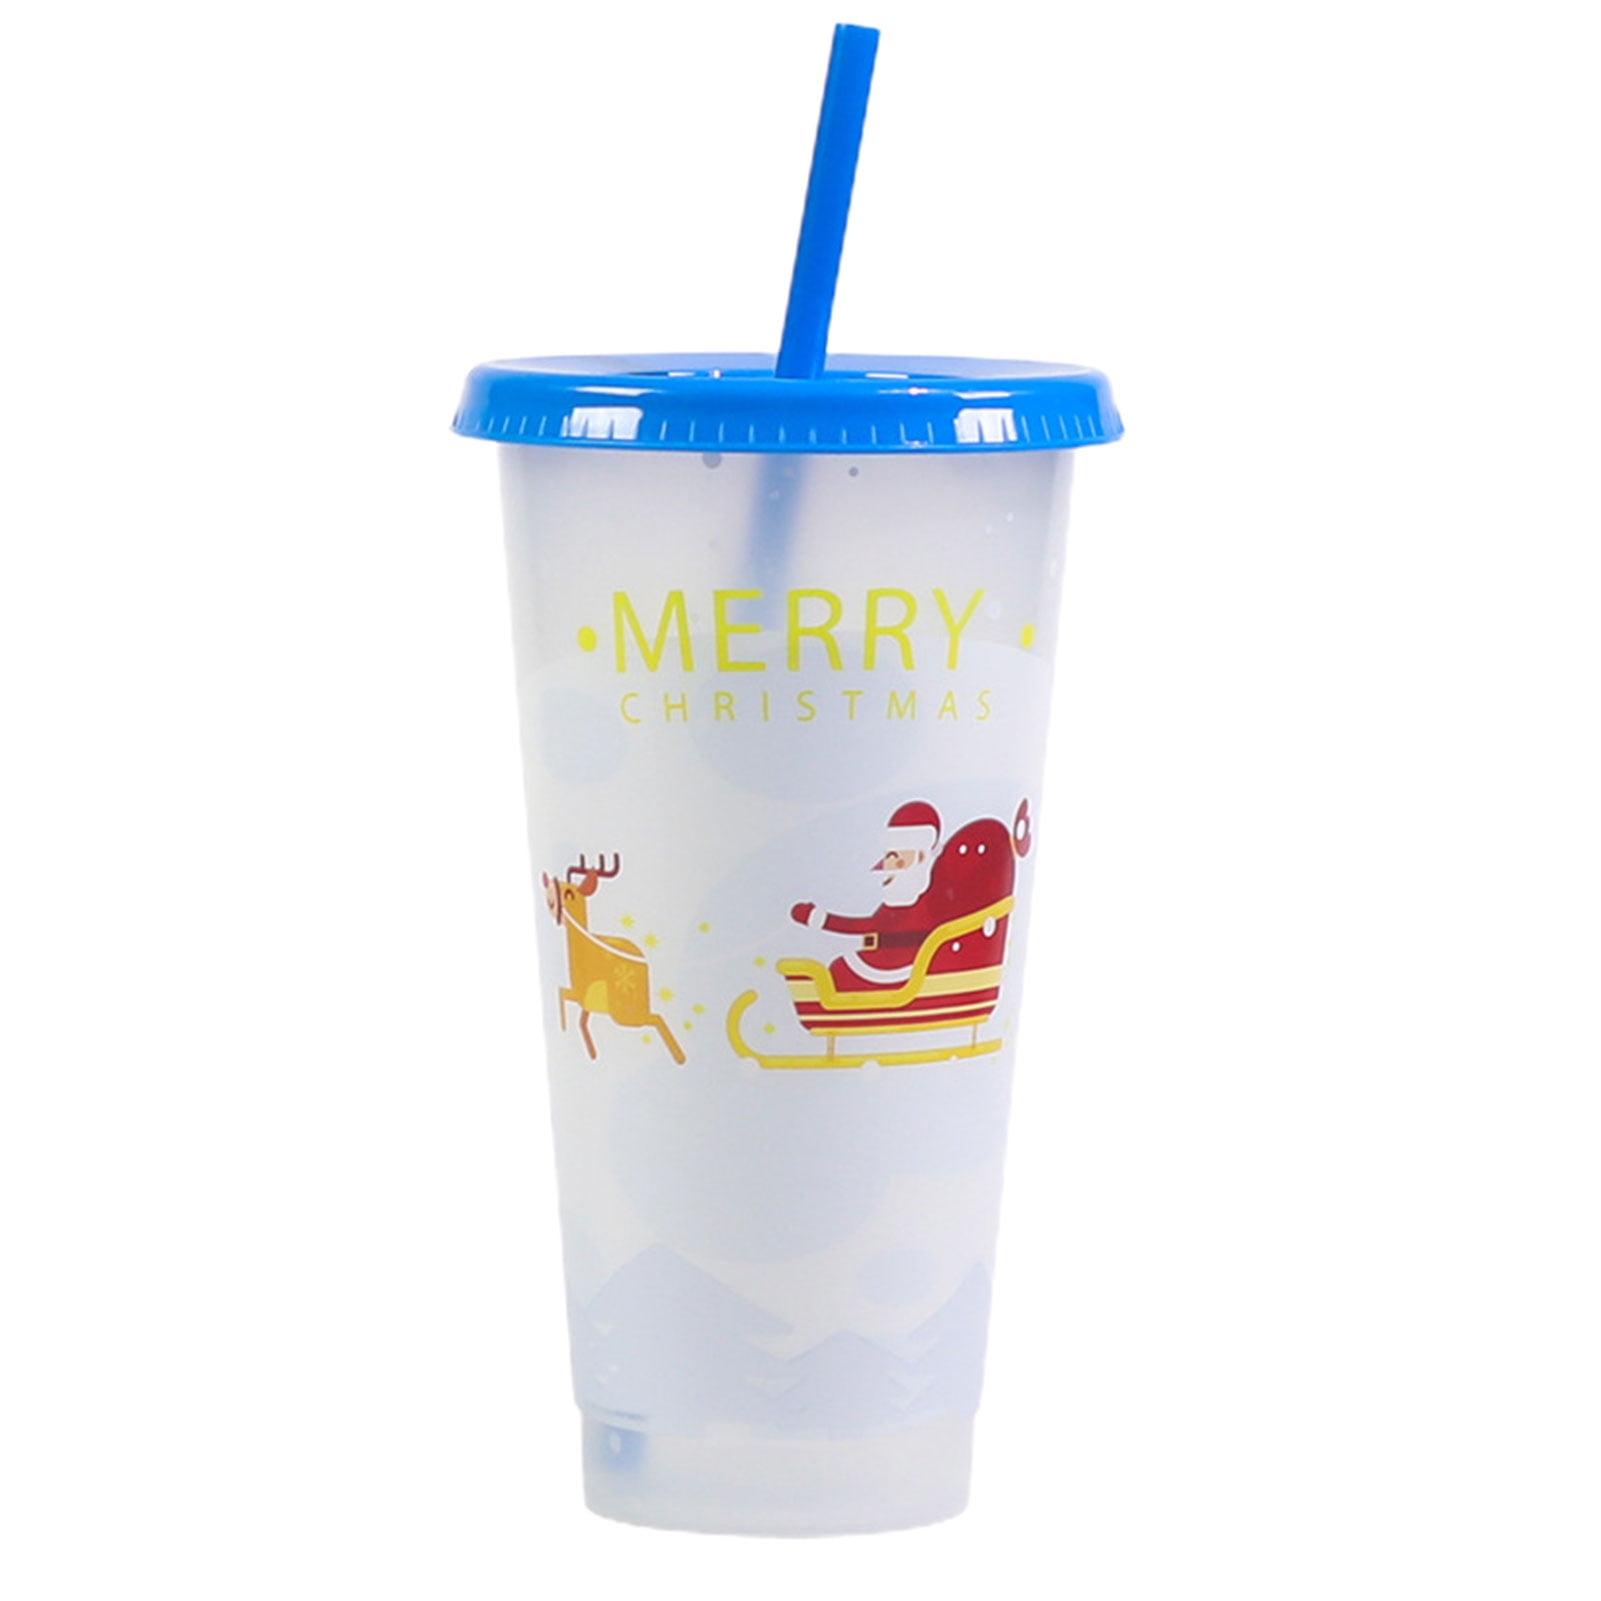 Sister Novelties Set of 2 Reusable Coffee Cups with Lids, Light Up Christmas Tumbler, Plastic Cups with Lids and Straws, Tumbler Cups with Lids